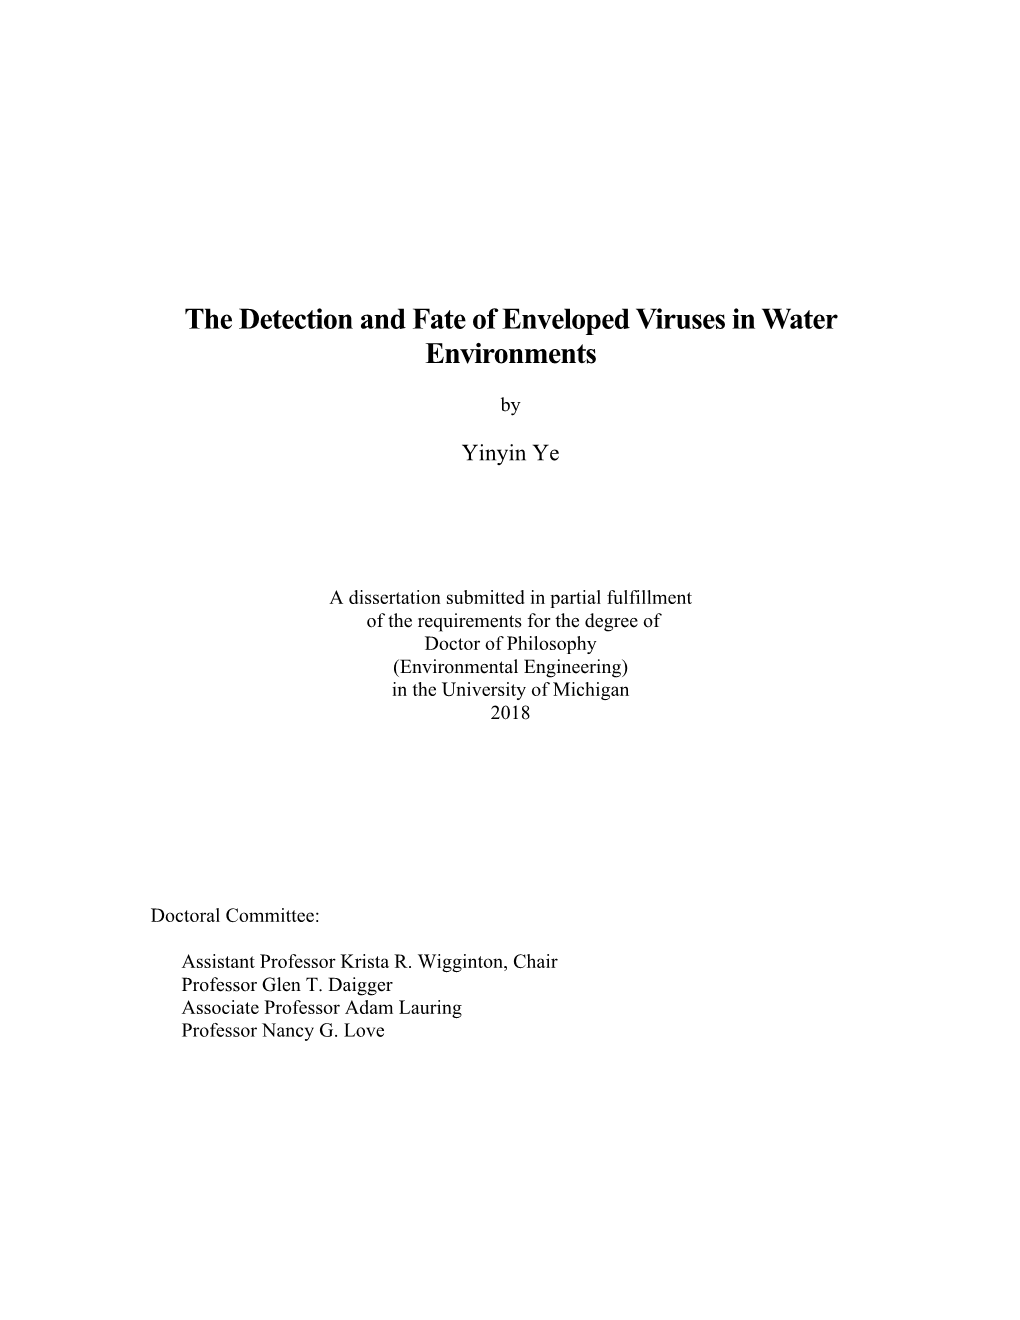 The Detection and Fate of Enveloped Viruses in Water Environments